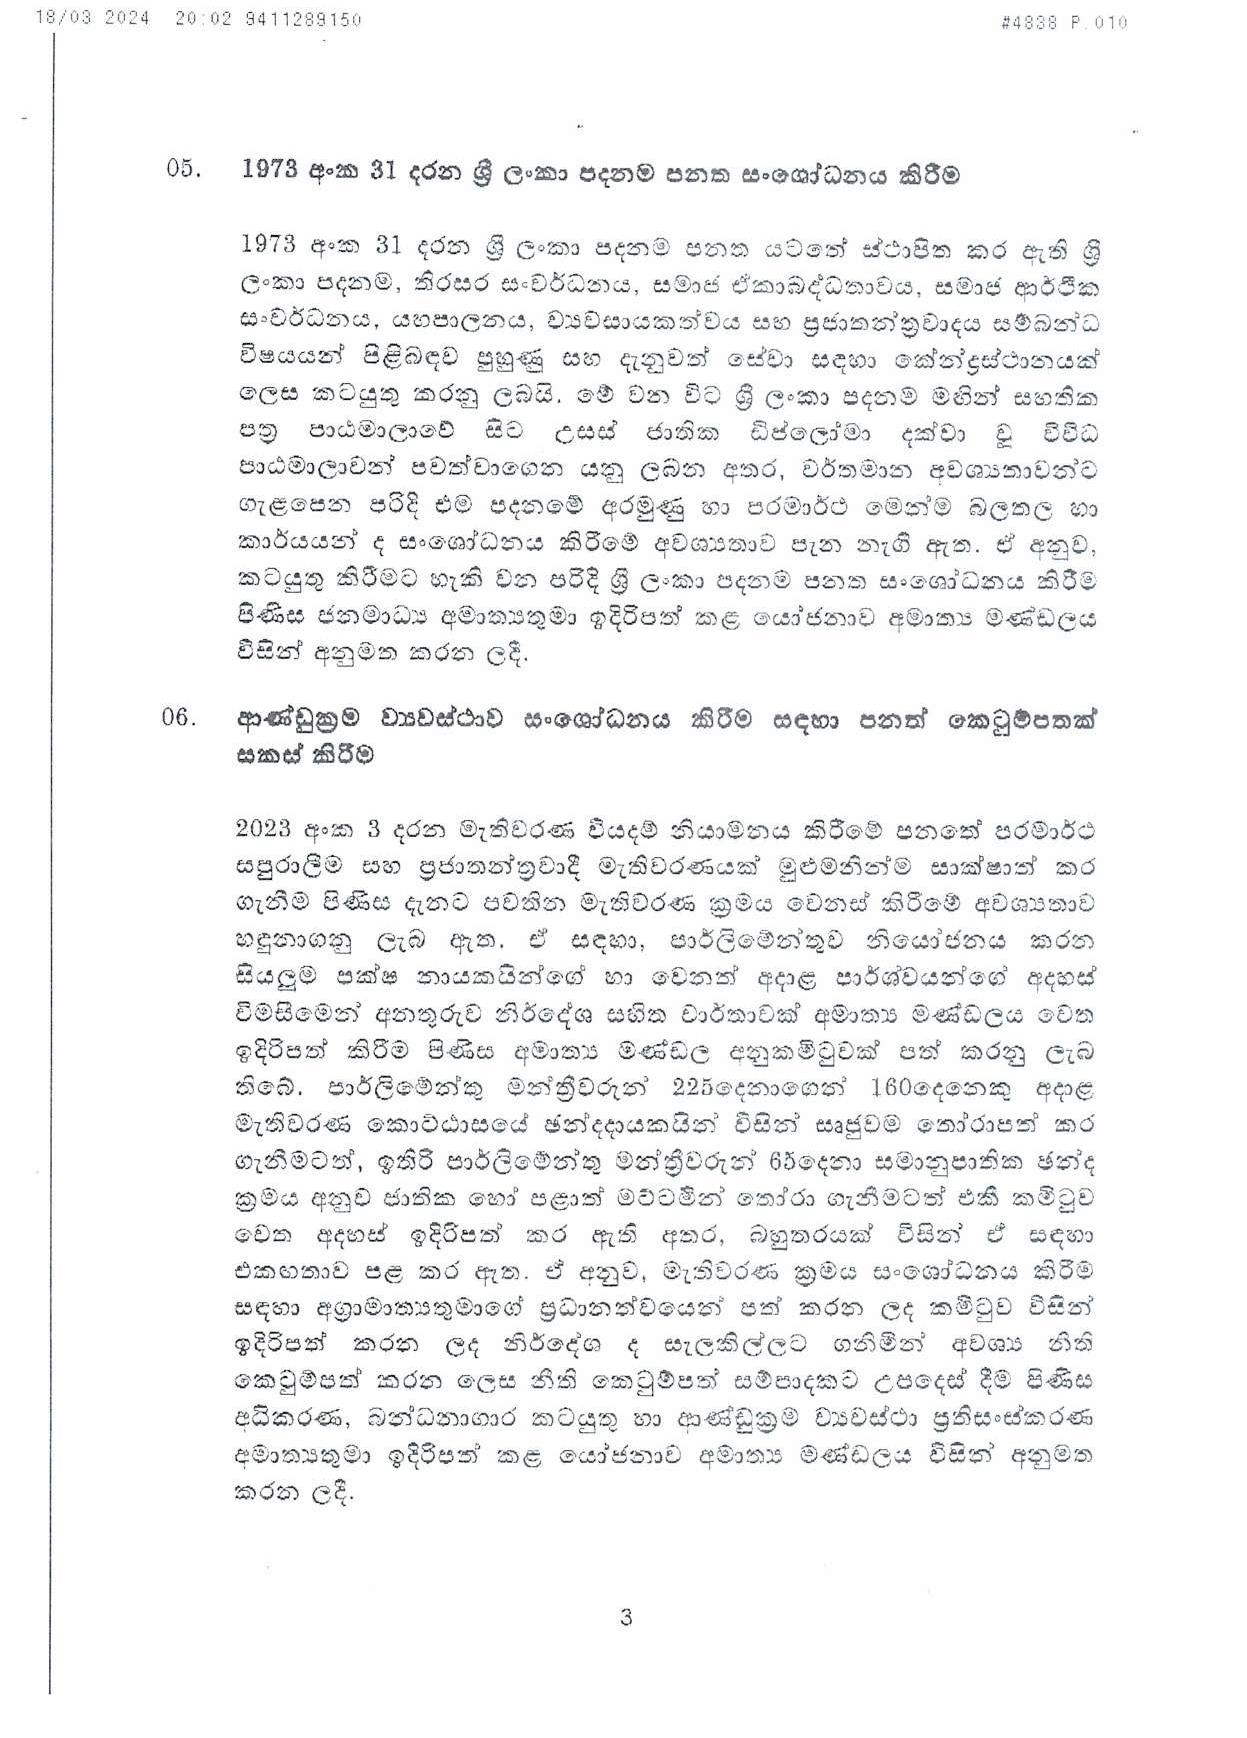 Cabinet Decisions on 18.03.2024 page 003